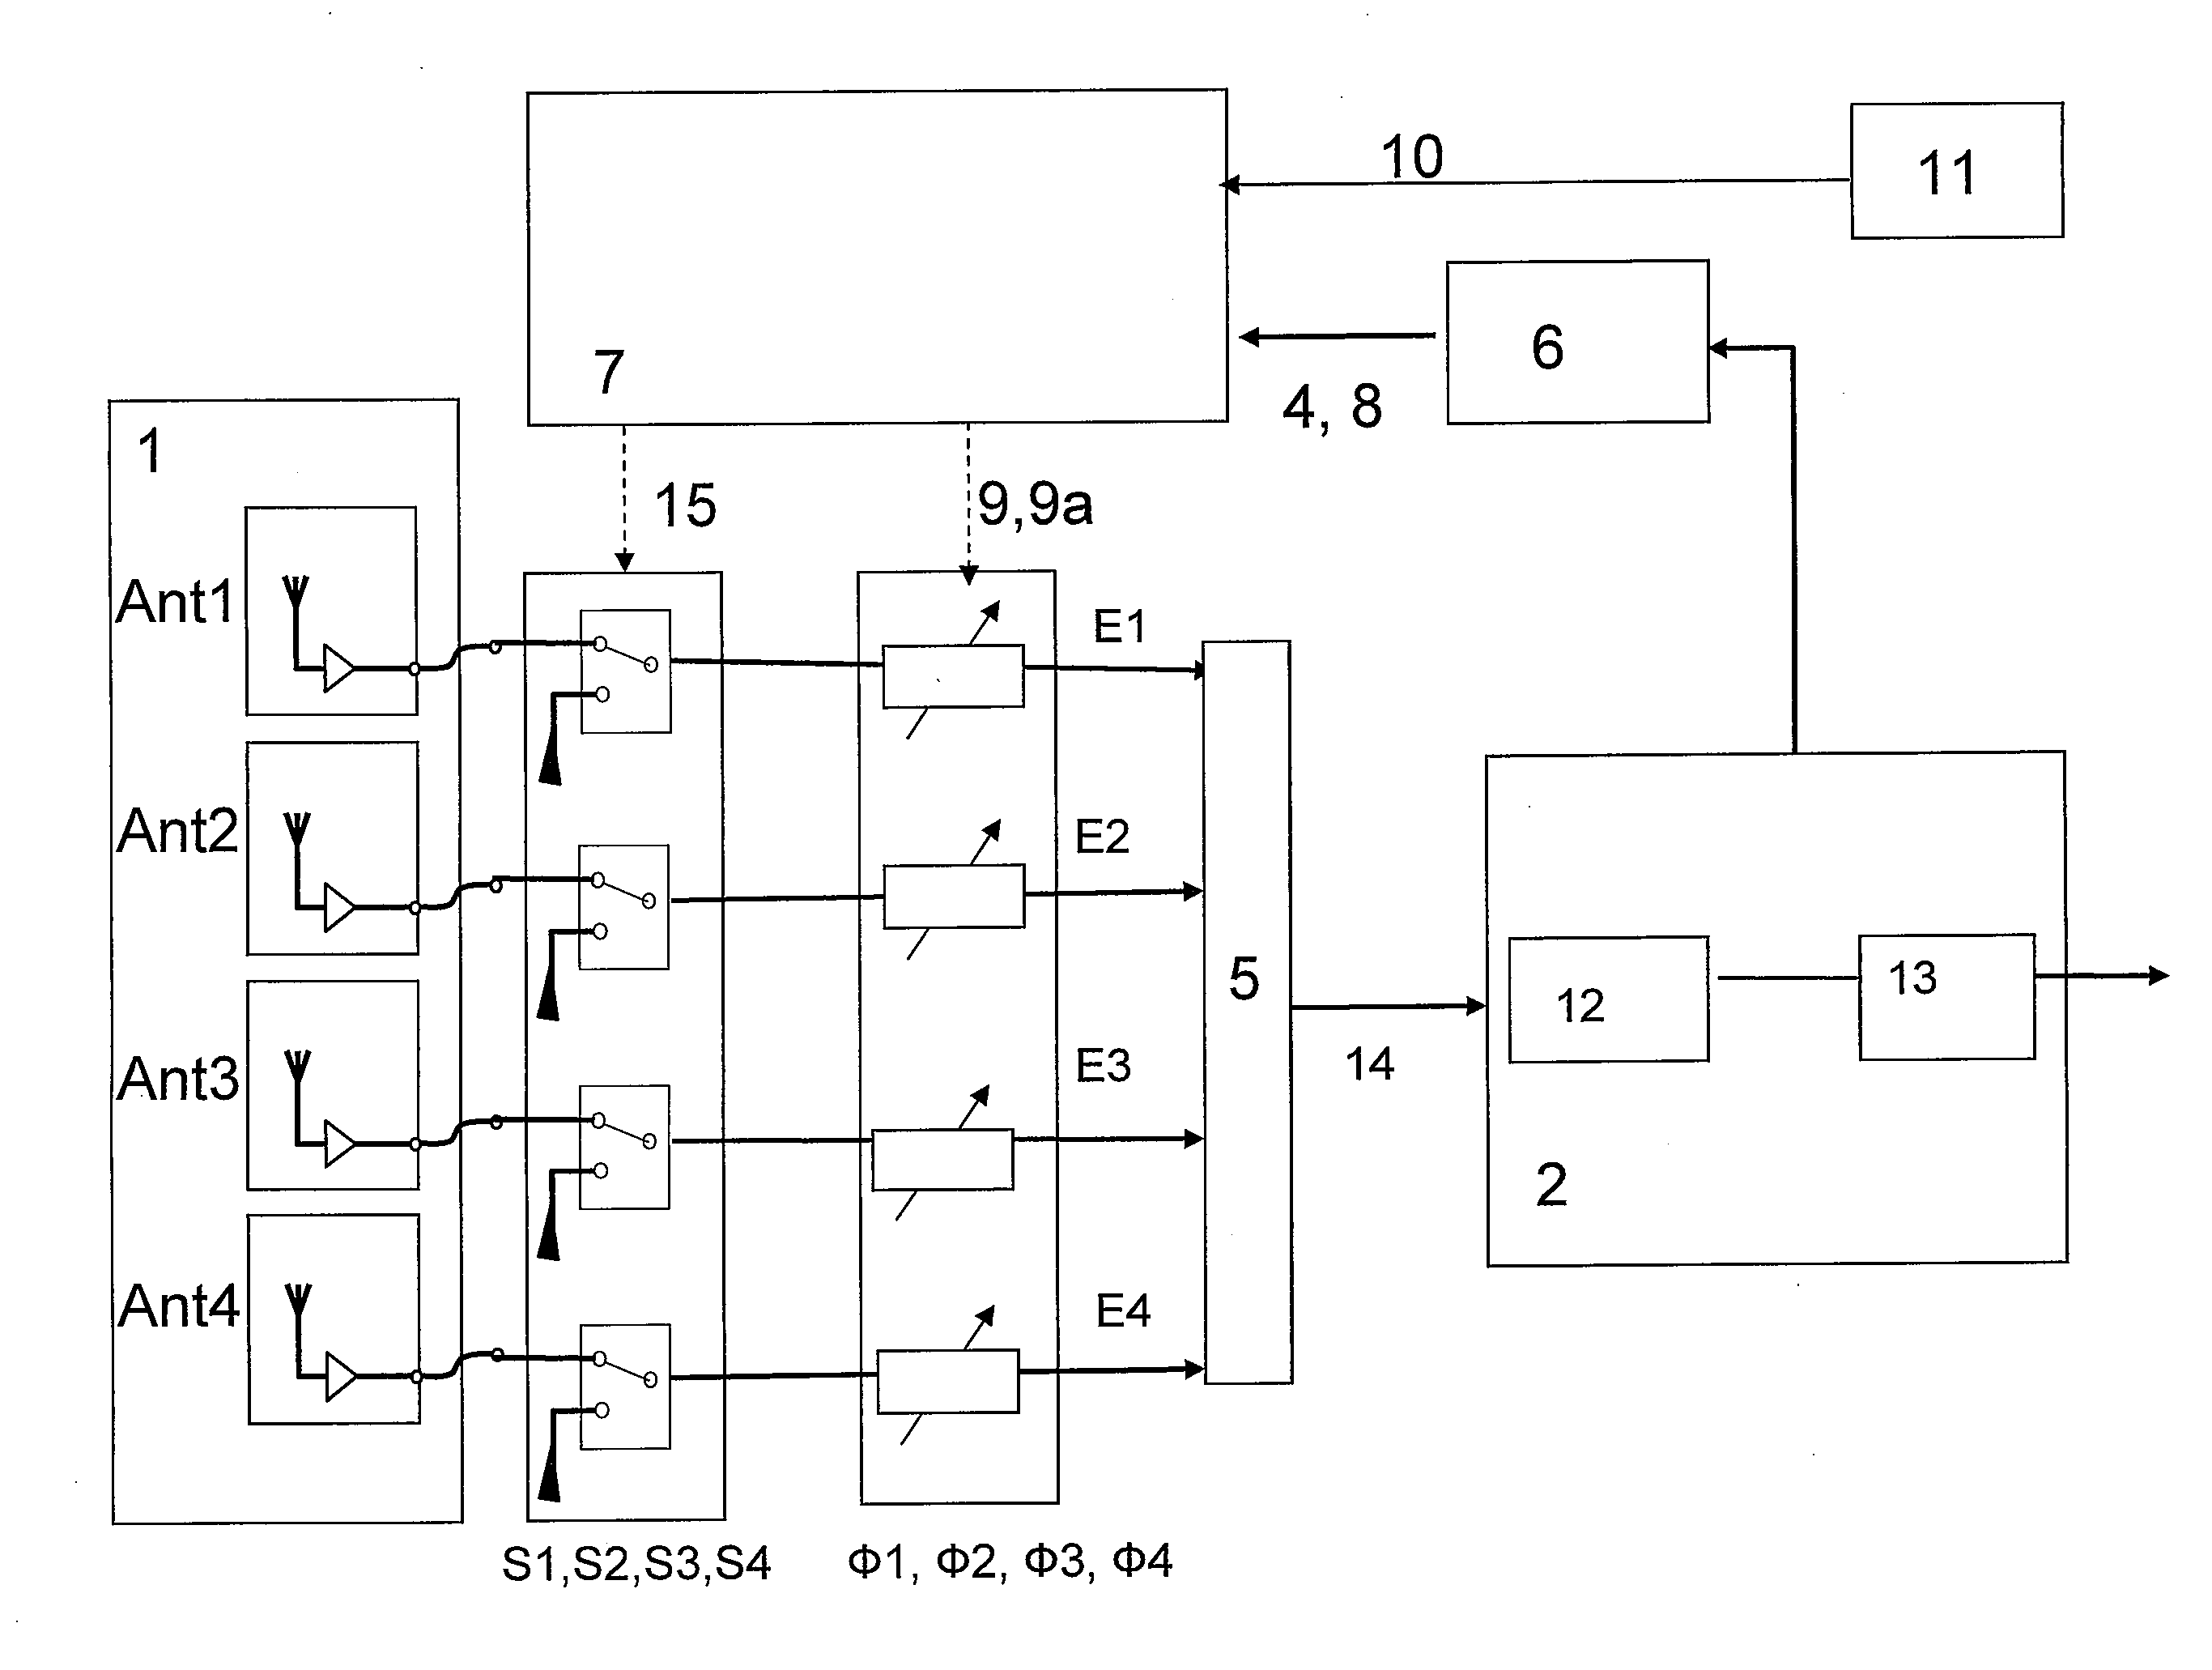 Reception system with phase alignment of antenna signals